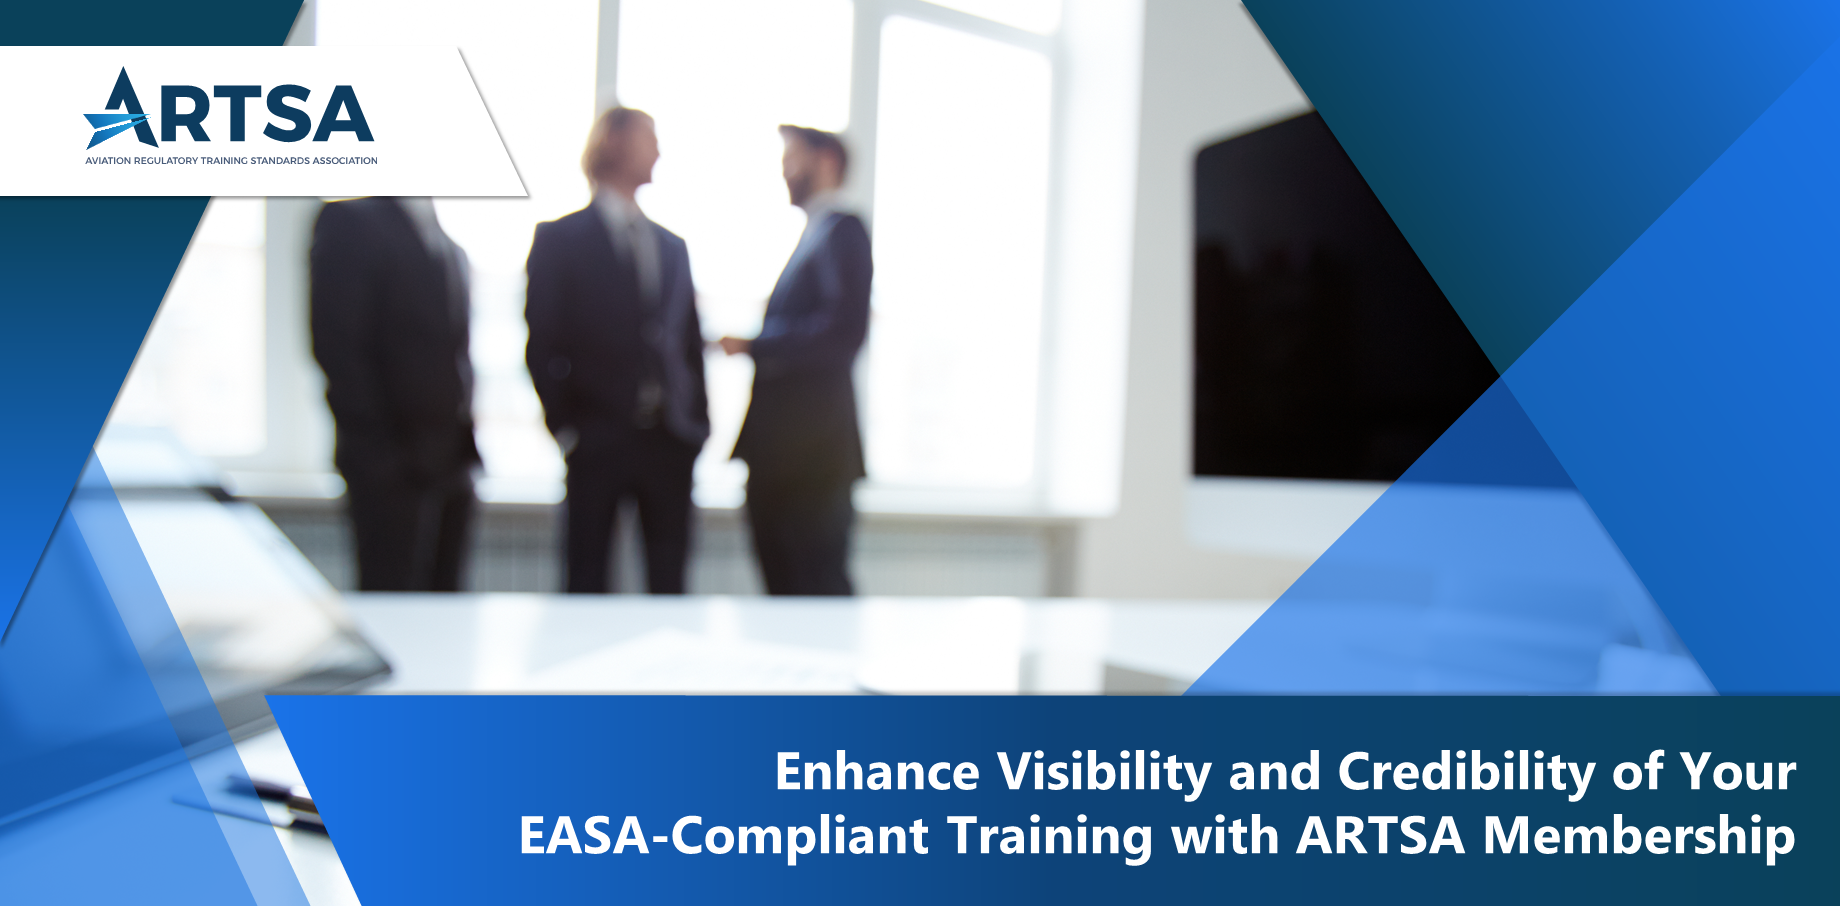 ARTSA provides a platform for Regulatory Training Organisations to demonstrate their commitment to deliver training to the highest standards.